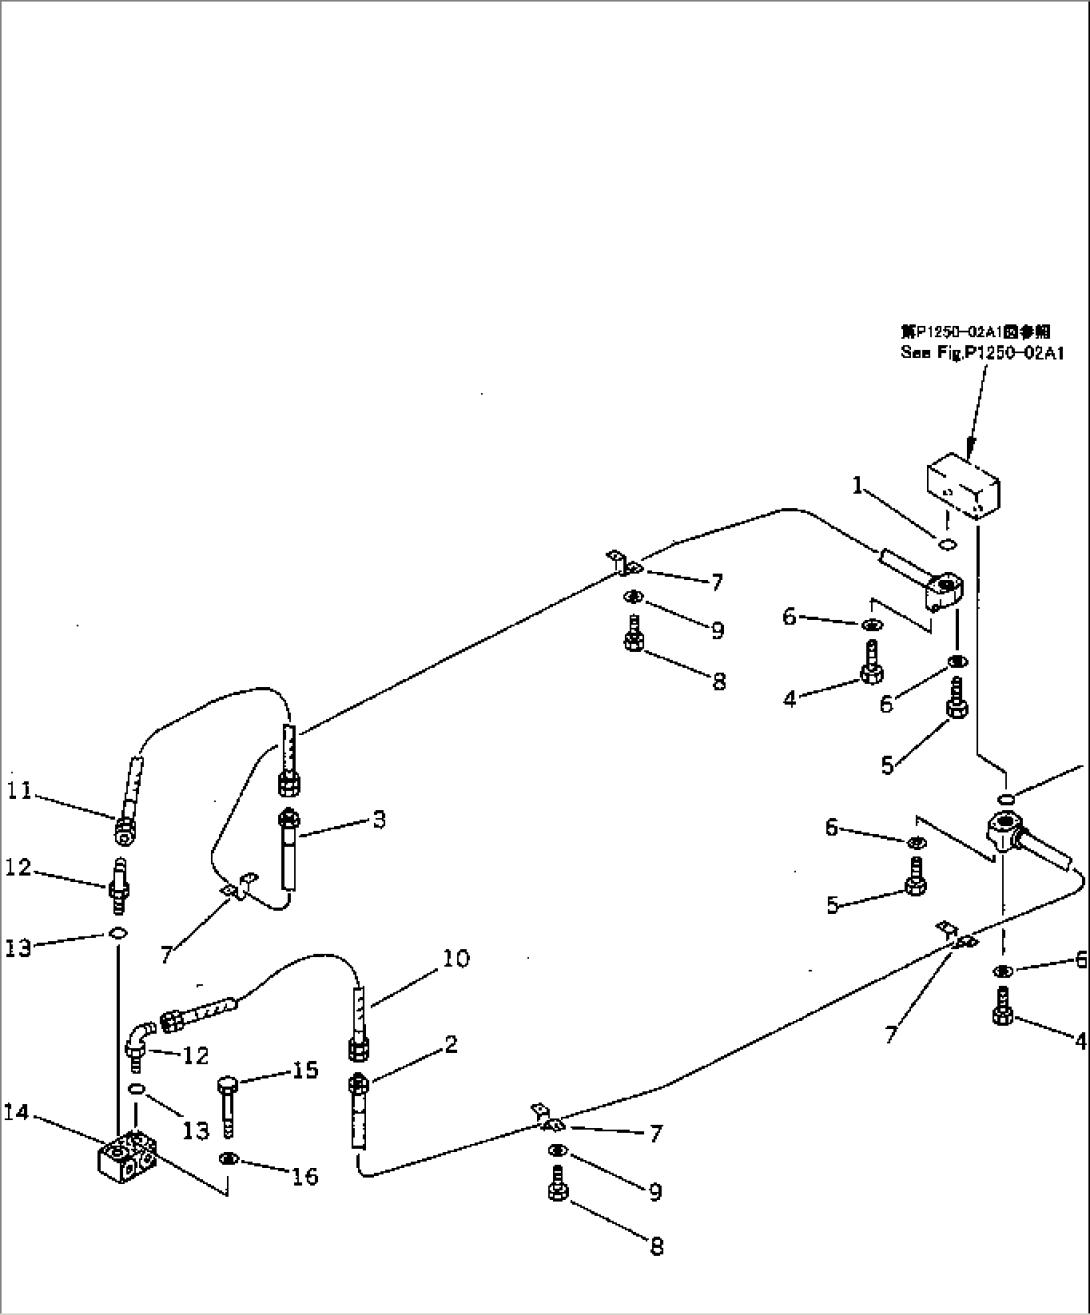 FRONT OUTRIGGER PIPING